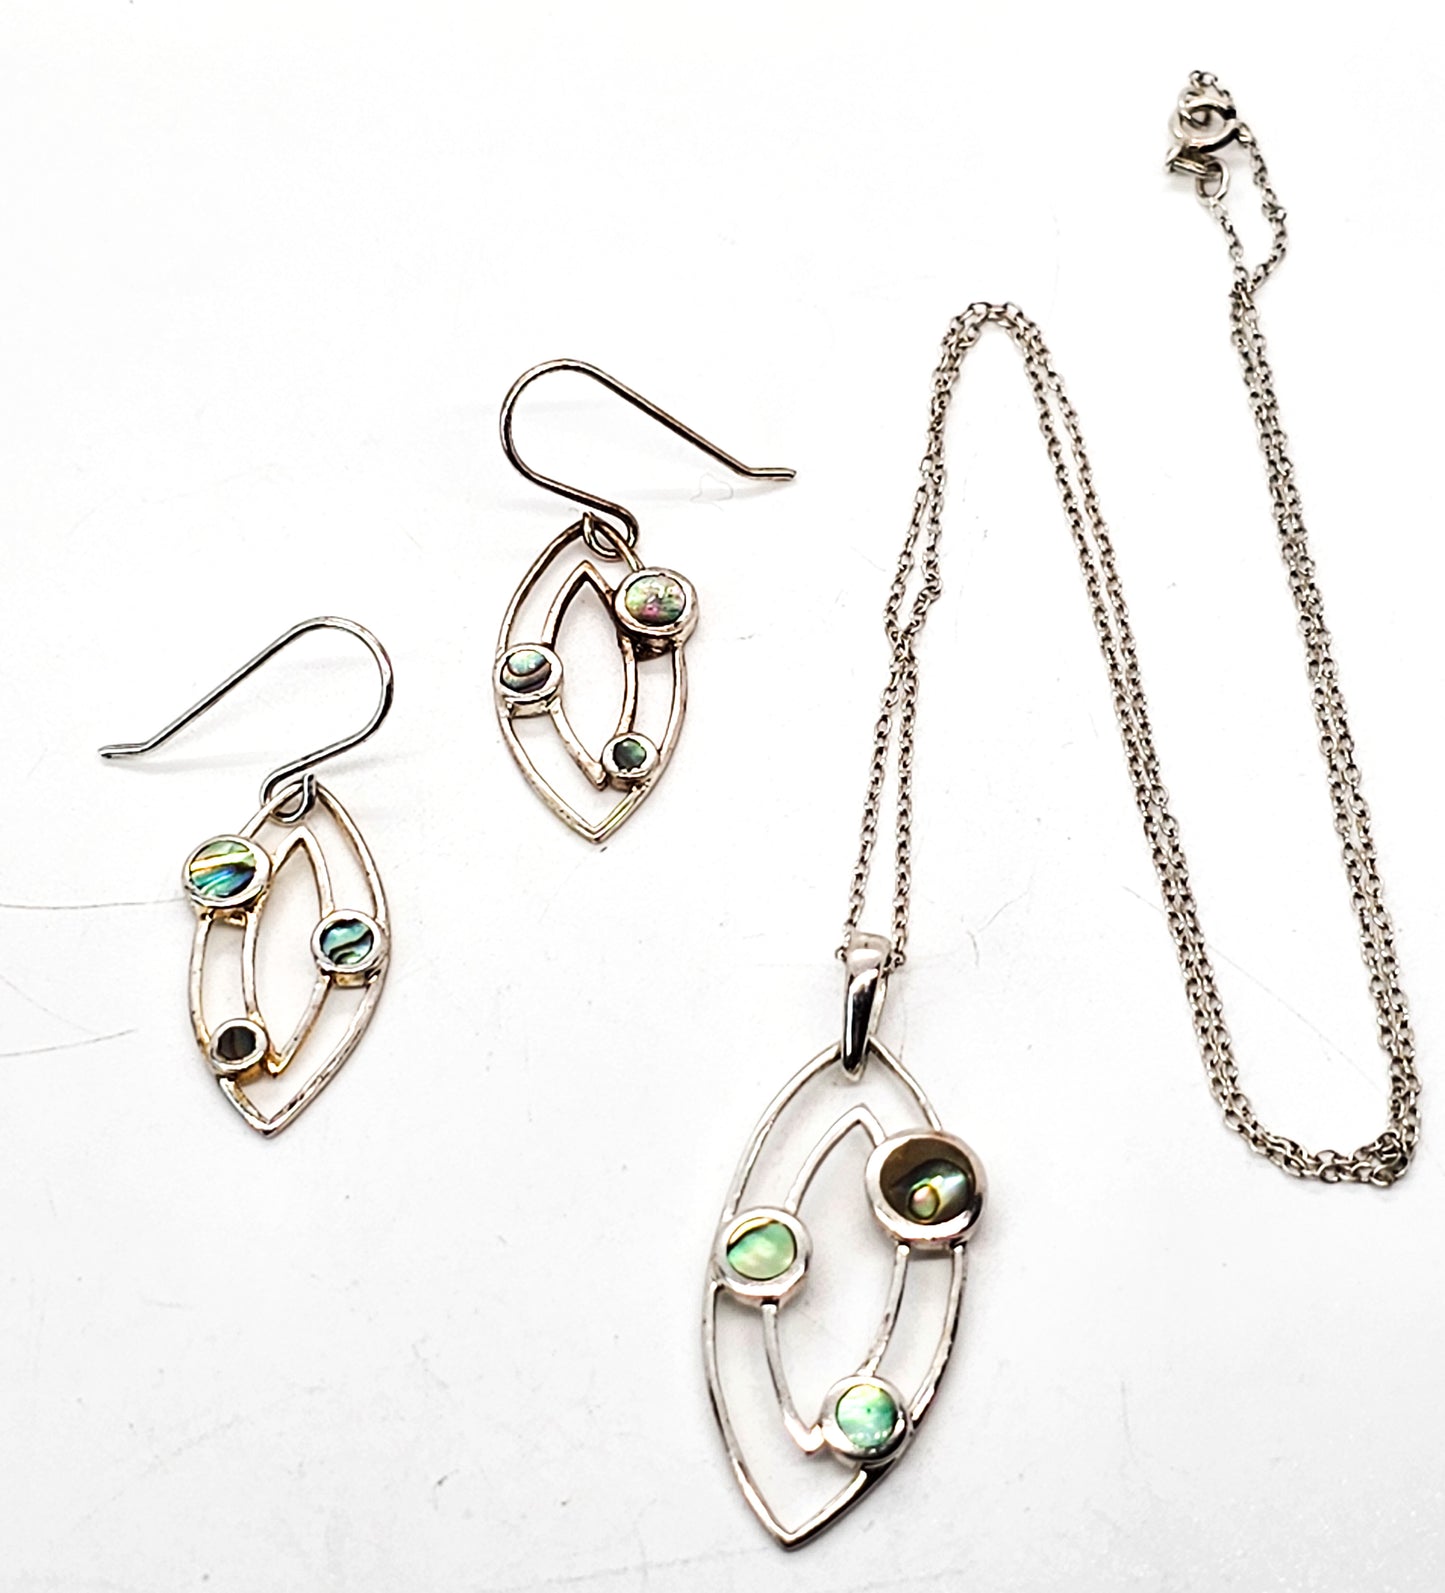 Atomic Abalone sterling silver vintage necklace and earrings set signed SU